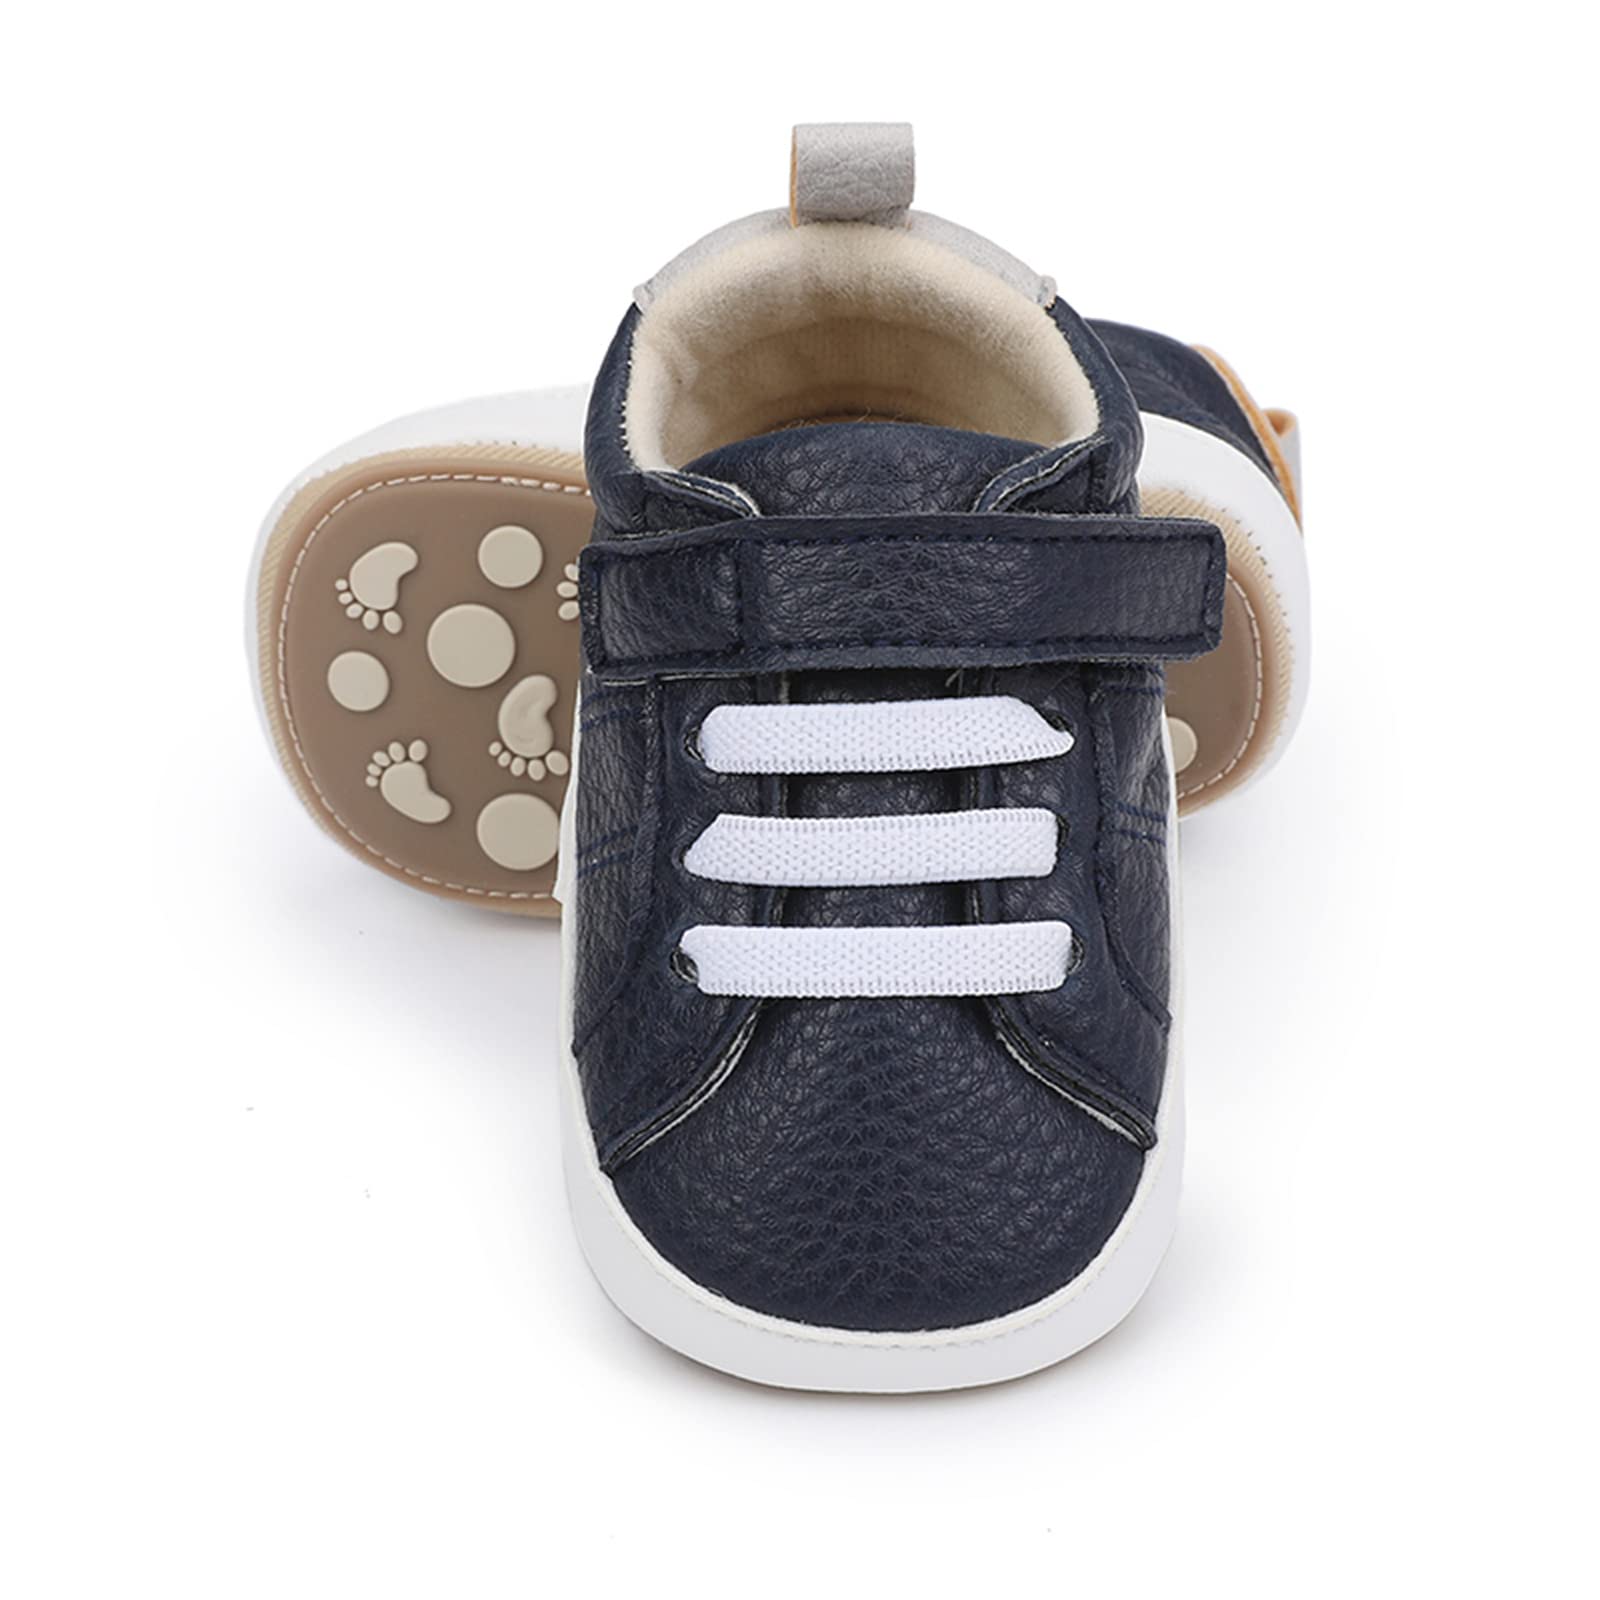 Sofmuo Baby Boys Girls Leather Sneakers Soft Rubber Sole Infant Moccasins Newborn Oxford Loafers Anti-Slip Toddler Dress Shoes (